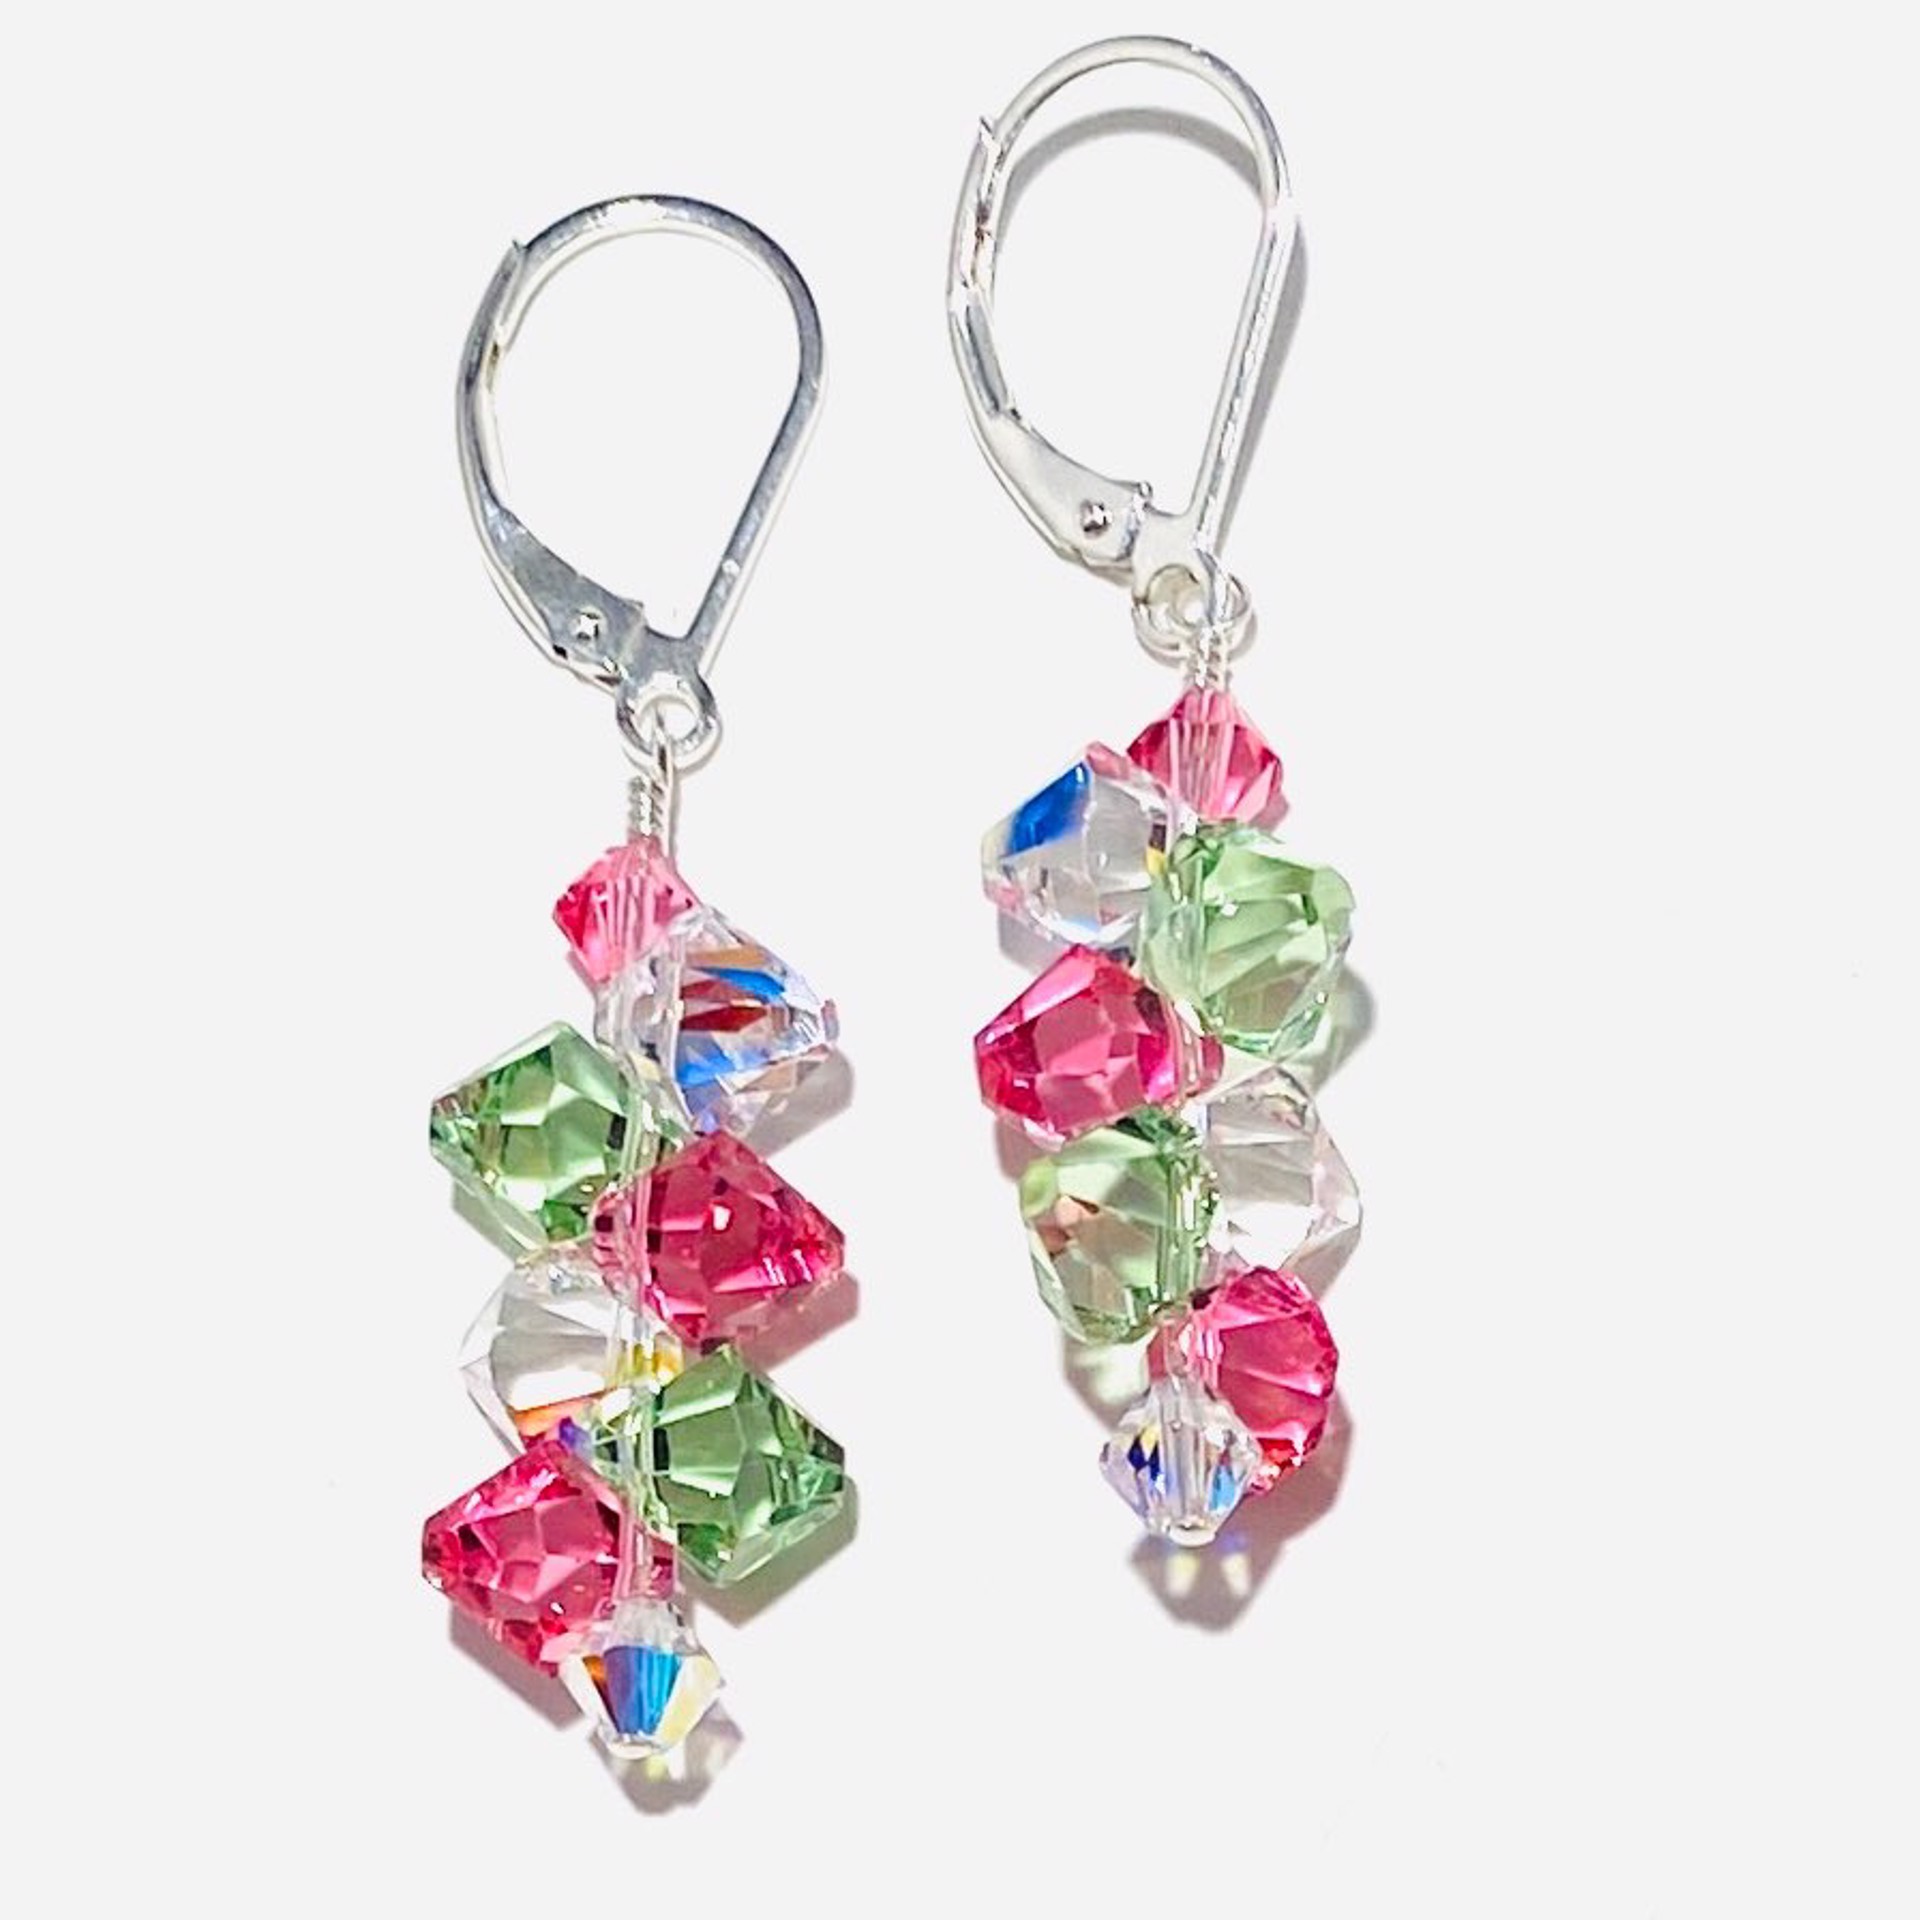 Babe in Pink and Green Swarovski Crystal Earrings SHOSH23-29 by Shoshannah Weinisch